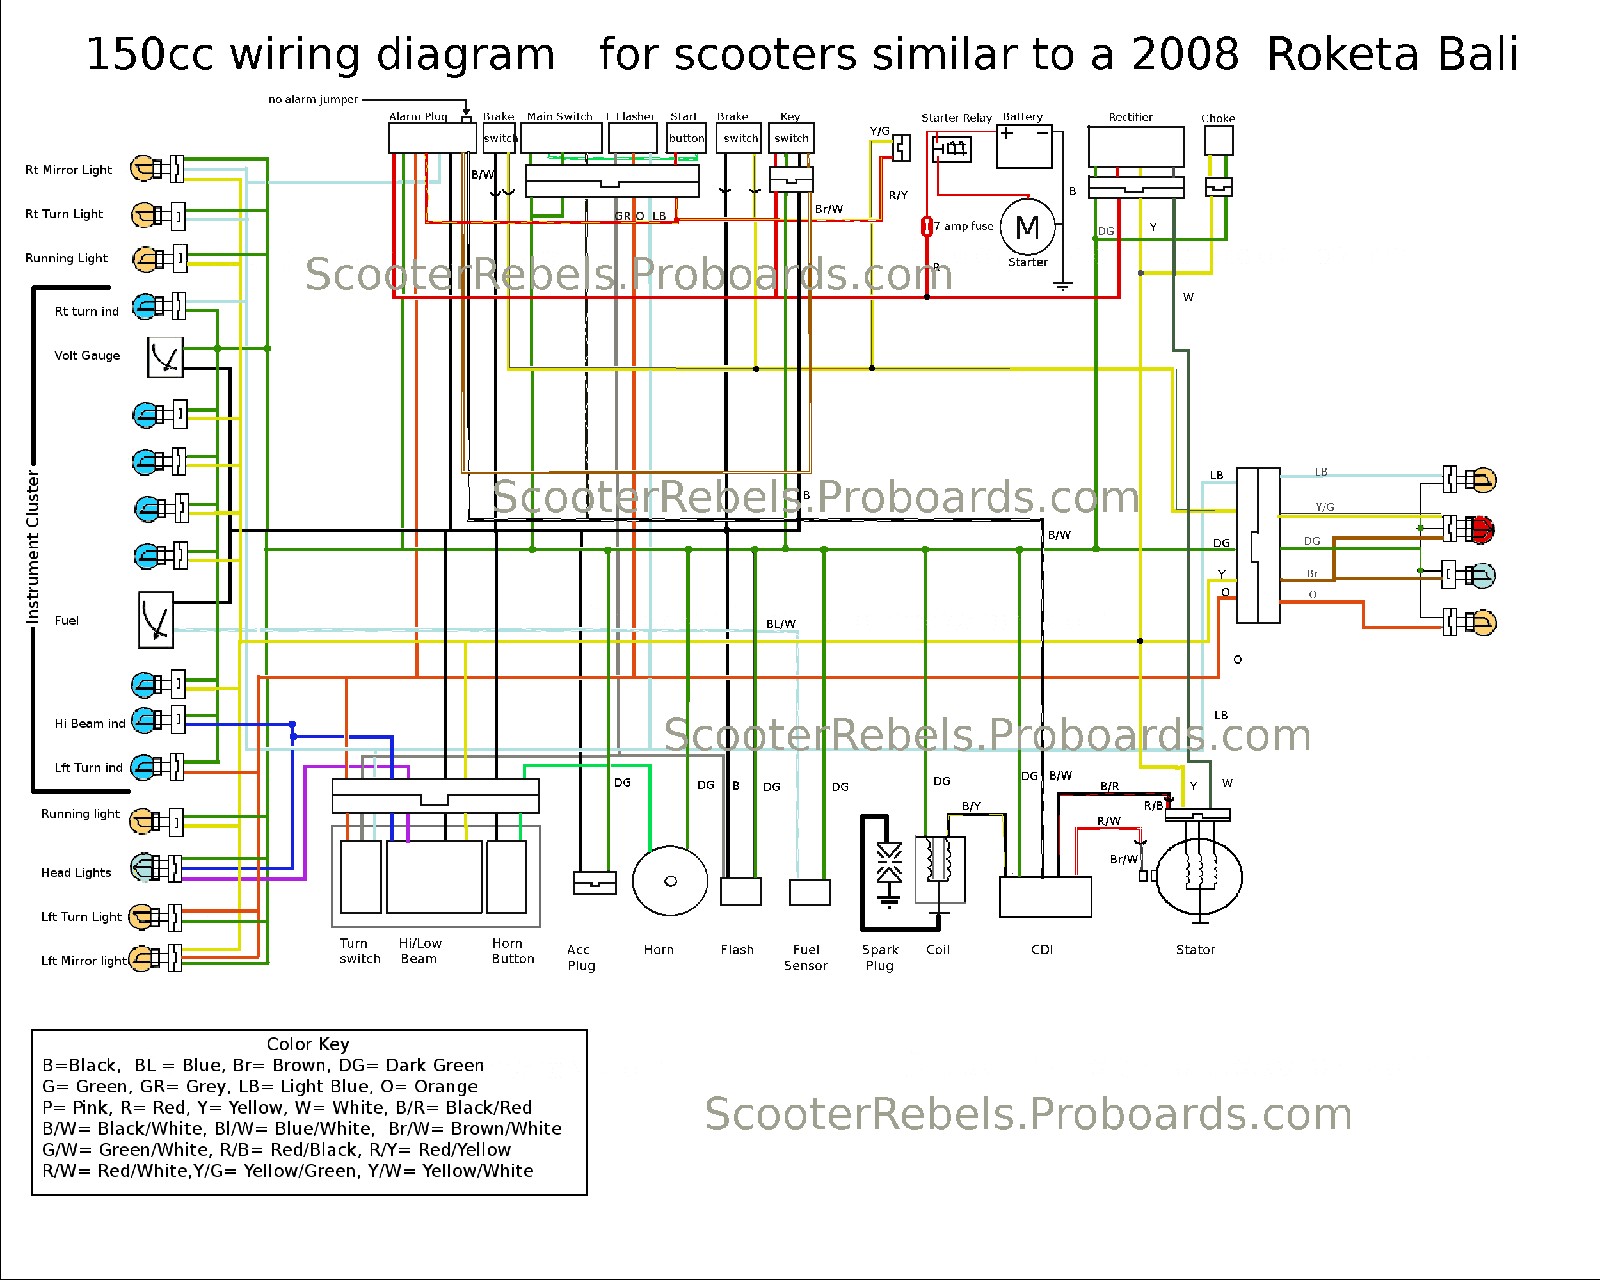 Scooter Wiring Diagram Wiring Diagram Show Electric Scooter Wiring Diagram Scooter Electrical Diagram